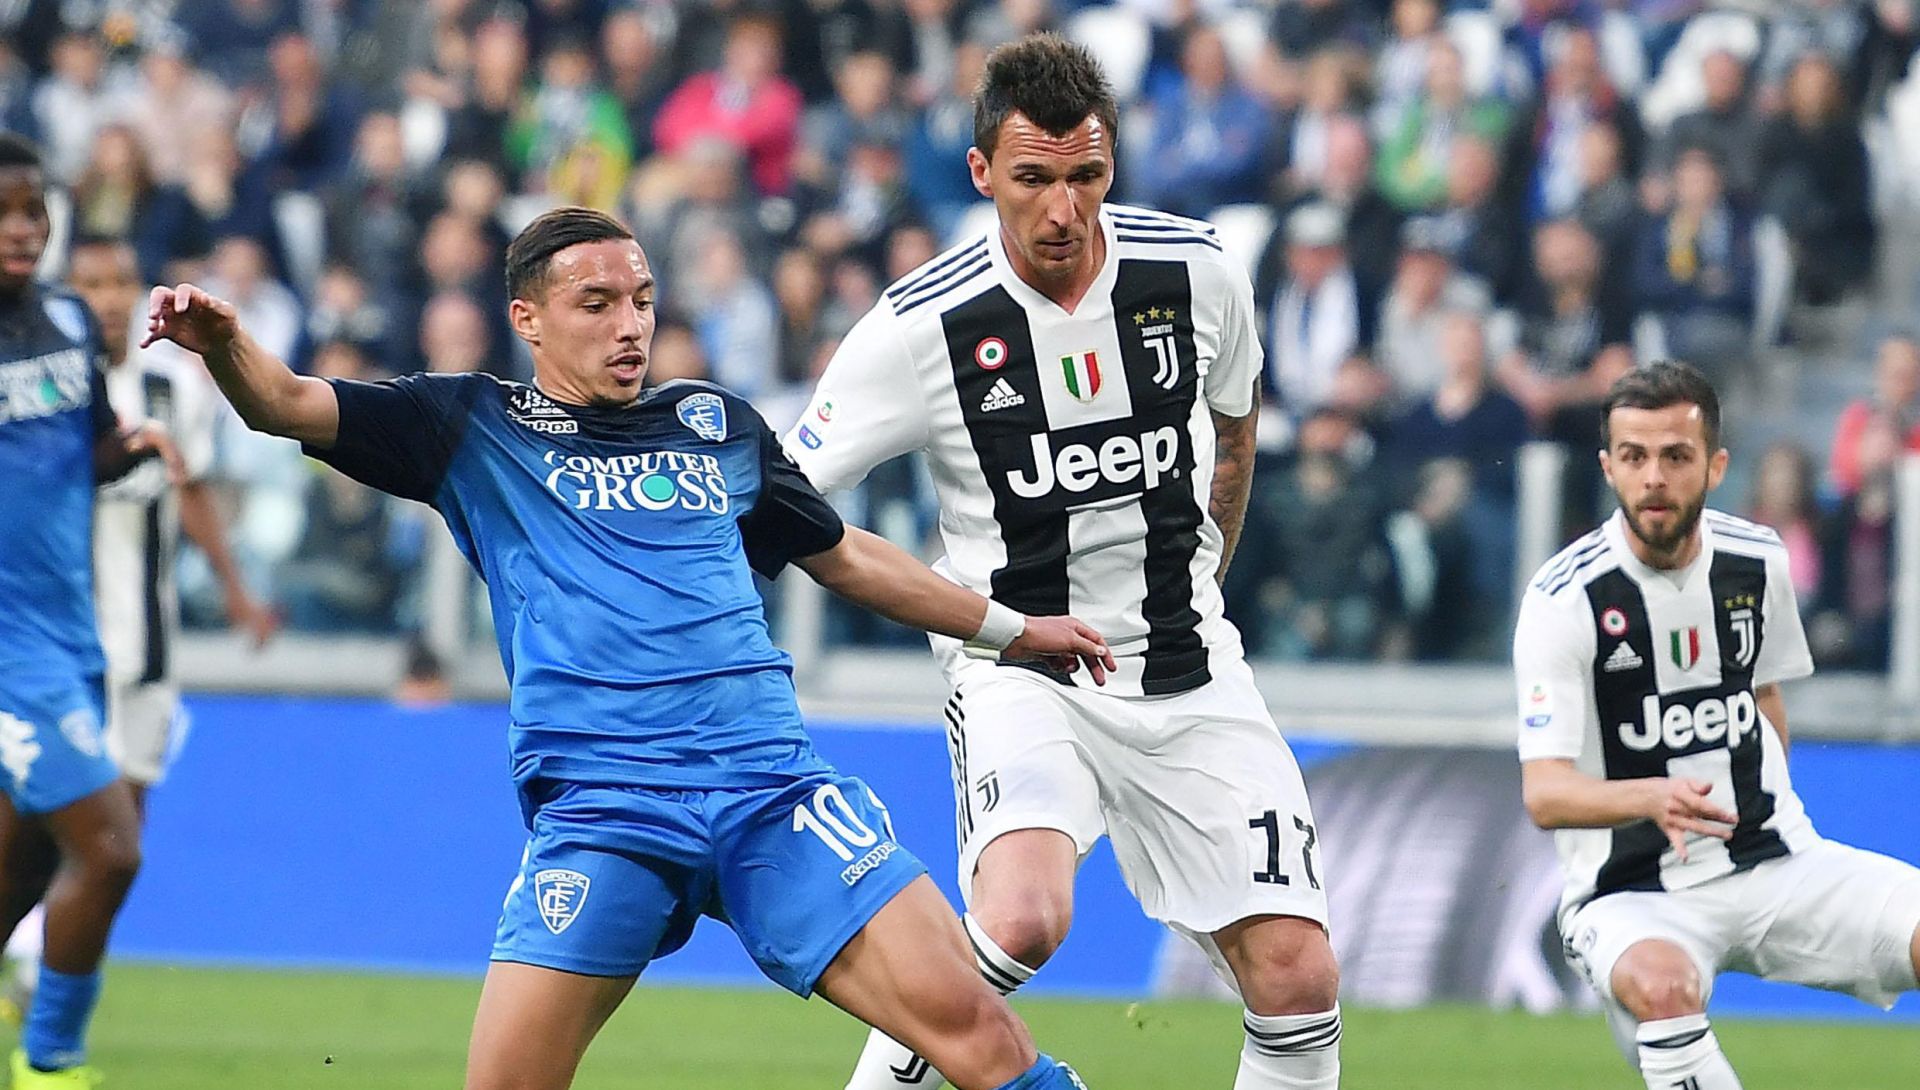 epa07473844 Juventus Mario Mandzukic and  Empoli's Ismael Bennacer (L) in action during the Italian Serie A soccer match Juventus FC vs Empoli FC at the Allianz stadium in Turin, Italy, 30 March 2019  EPA/ALESSANDRO DI MARCO